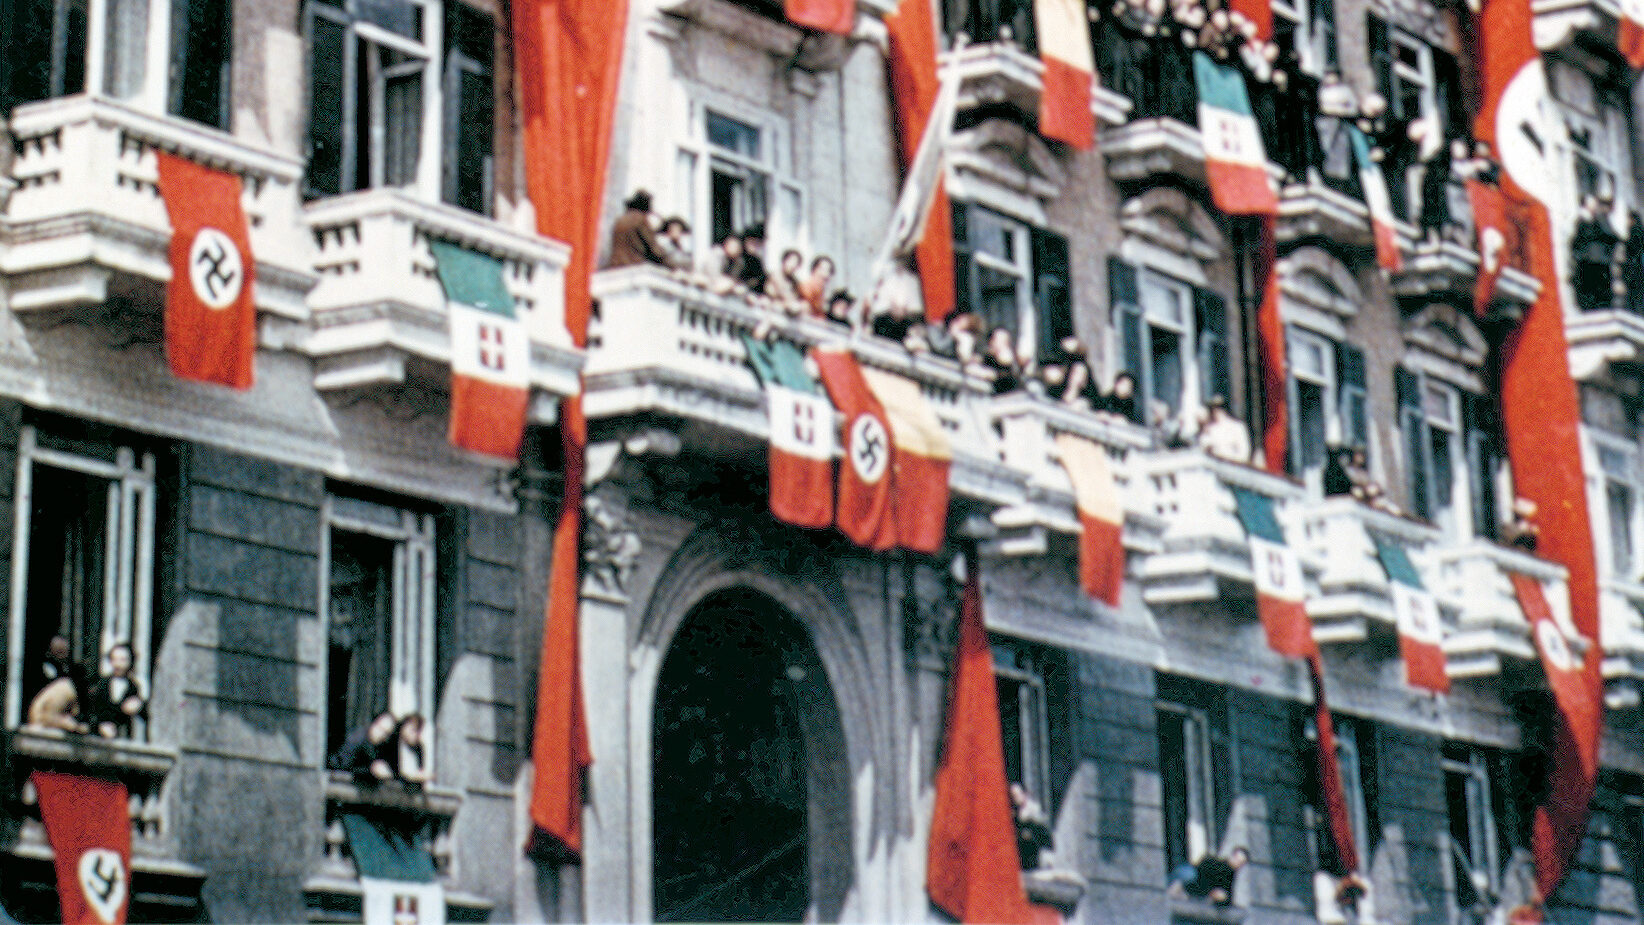 Building façades were bedecked with flags of Nazi Germany and Fascist Italy during Hitler’s state visit to Rome in May 1937.